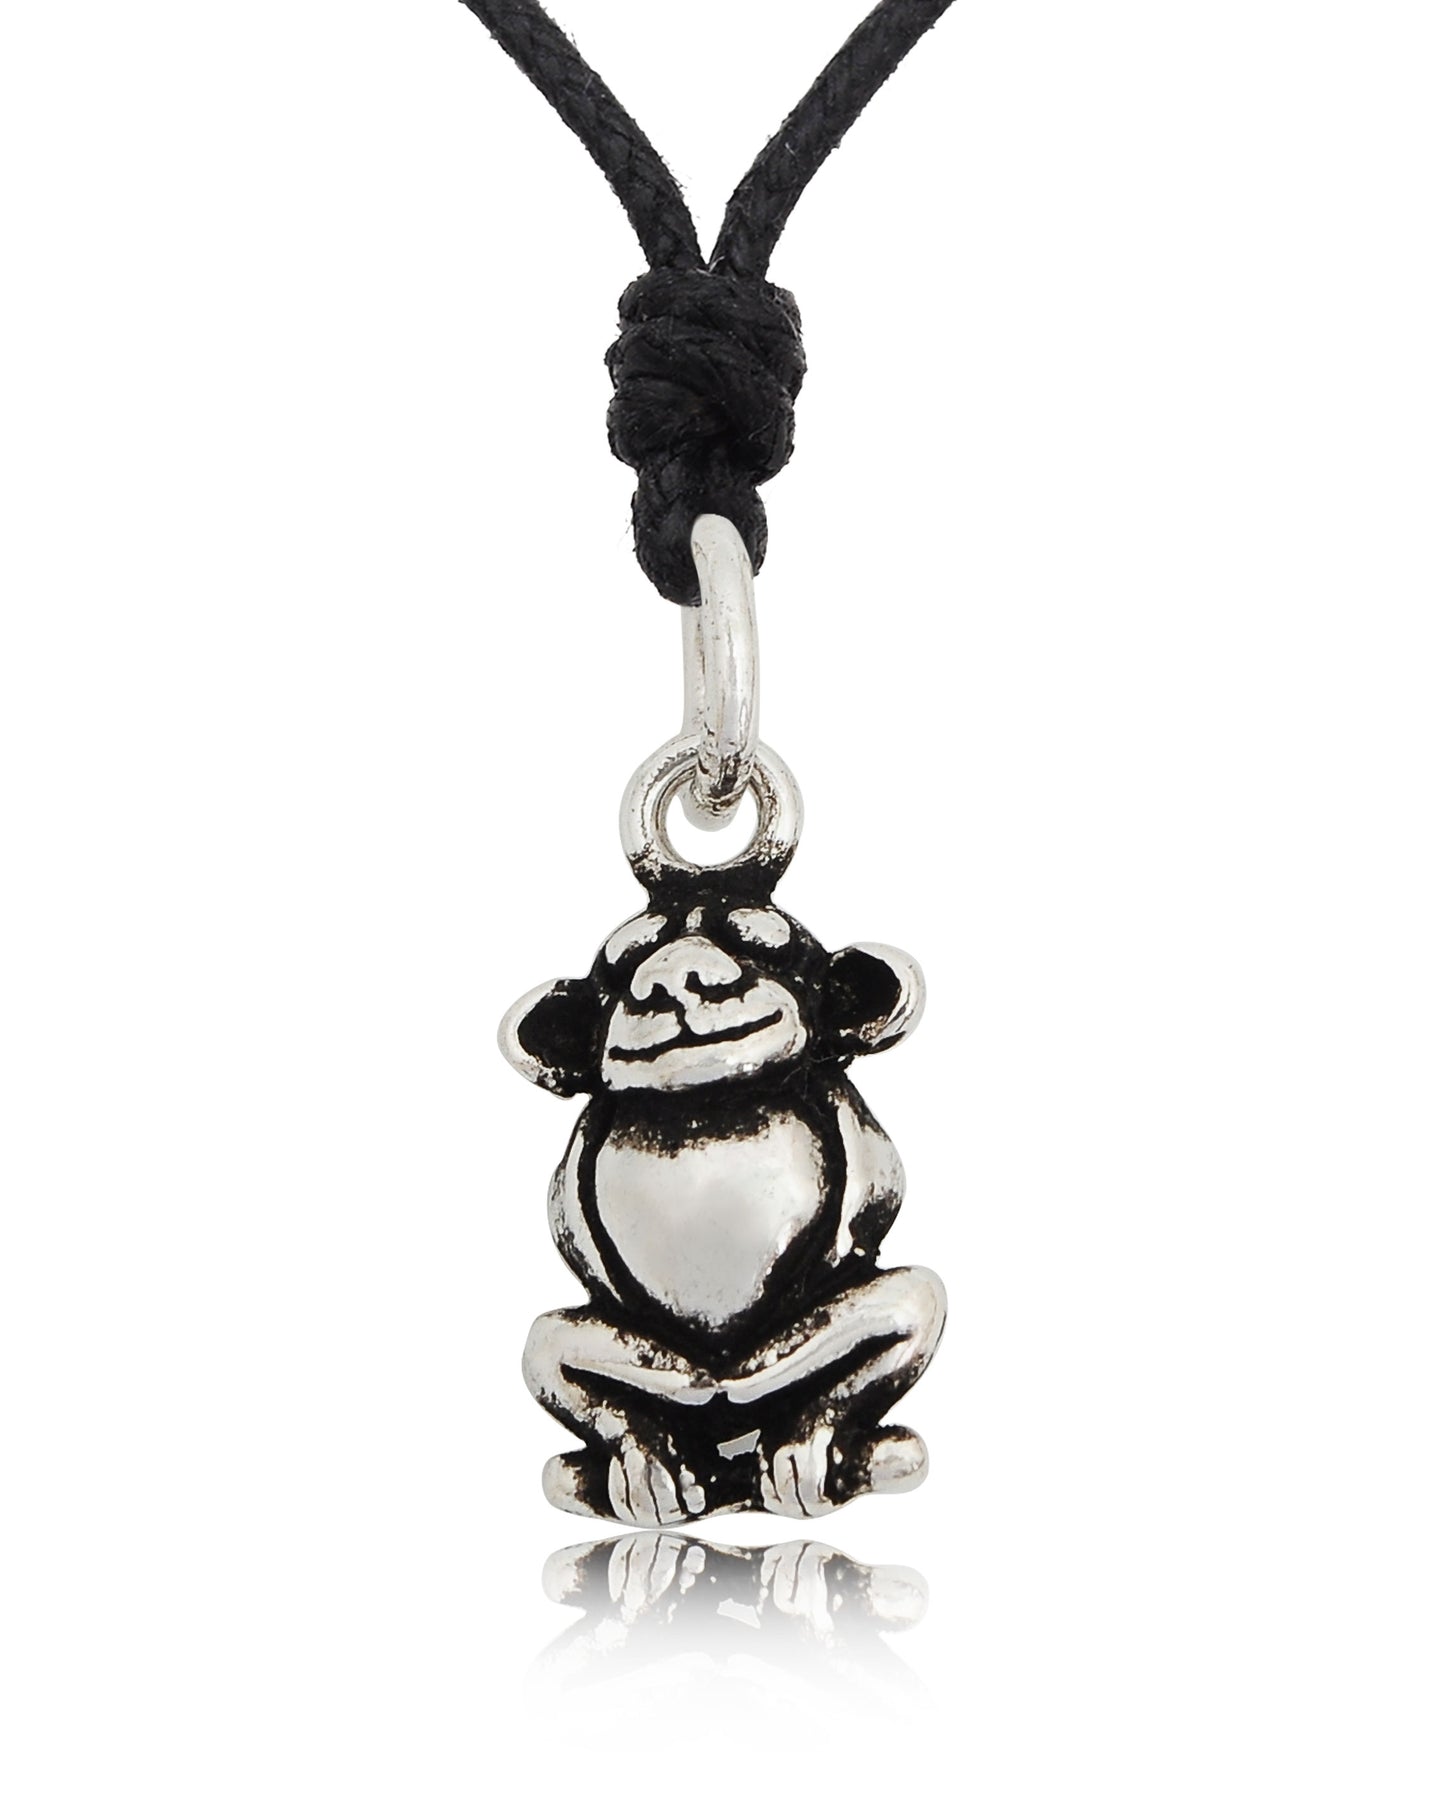 Happy Chubby Monkey  Silver Pewter Charm Necklace Pendant Jewelry With Cotton Cord